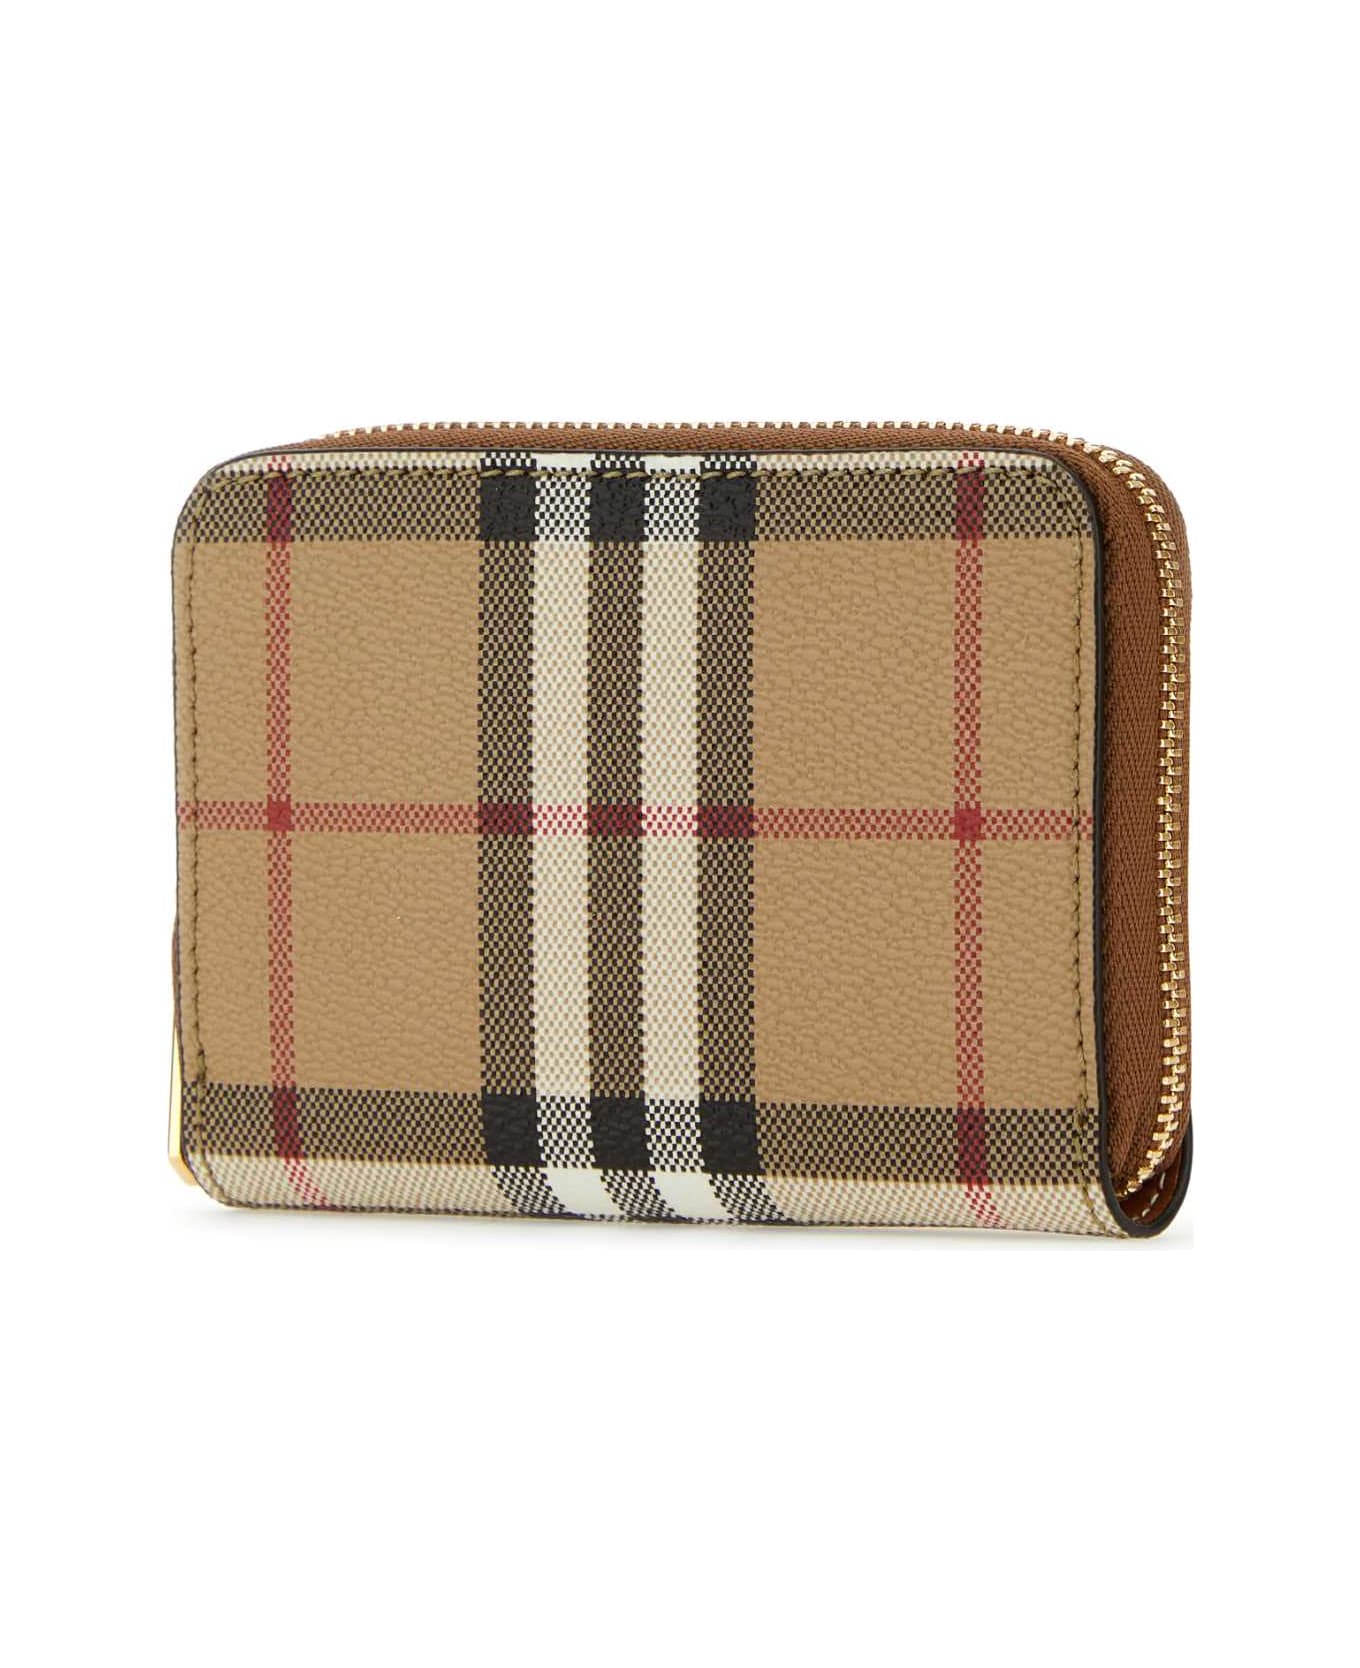 Burberry Printed E-canvas Wallet - VINTCHCKBRIRBROWN